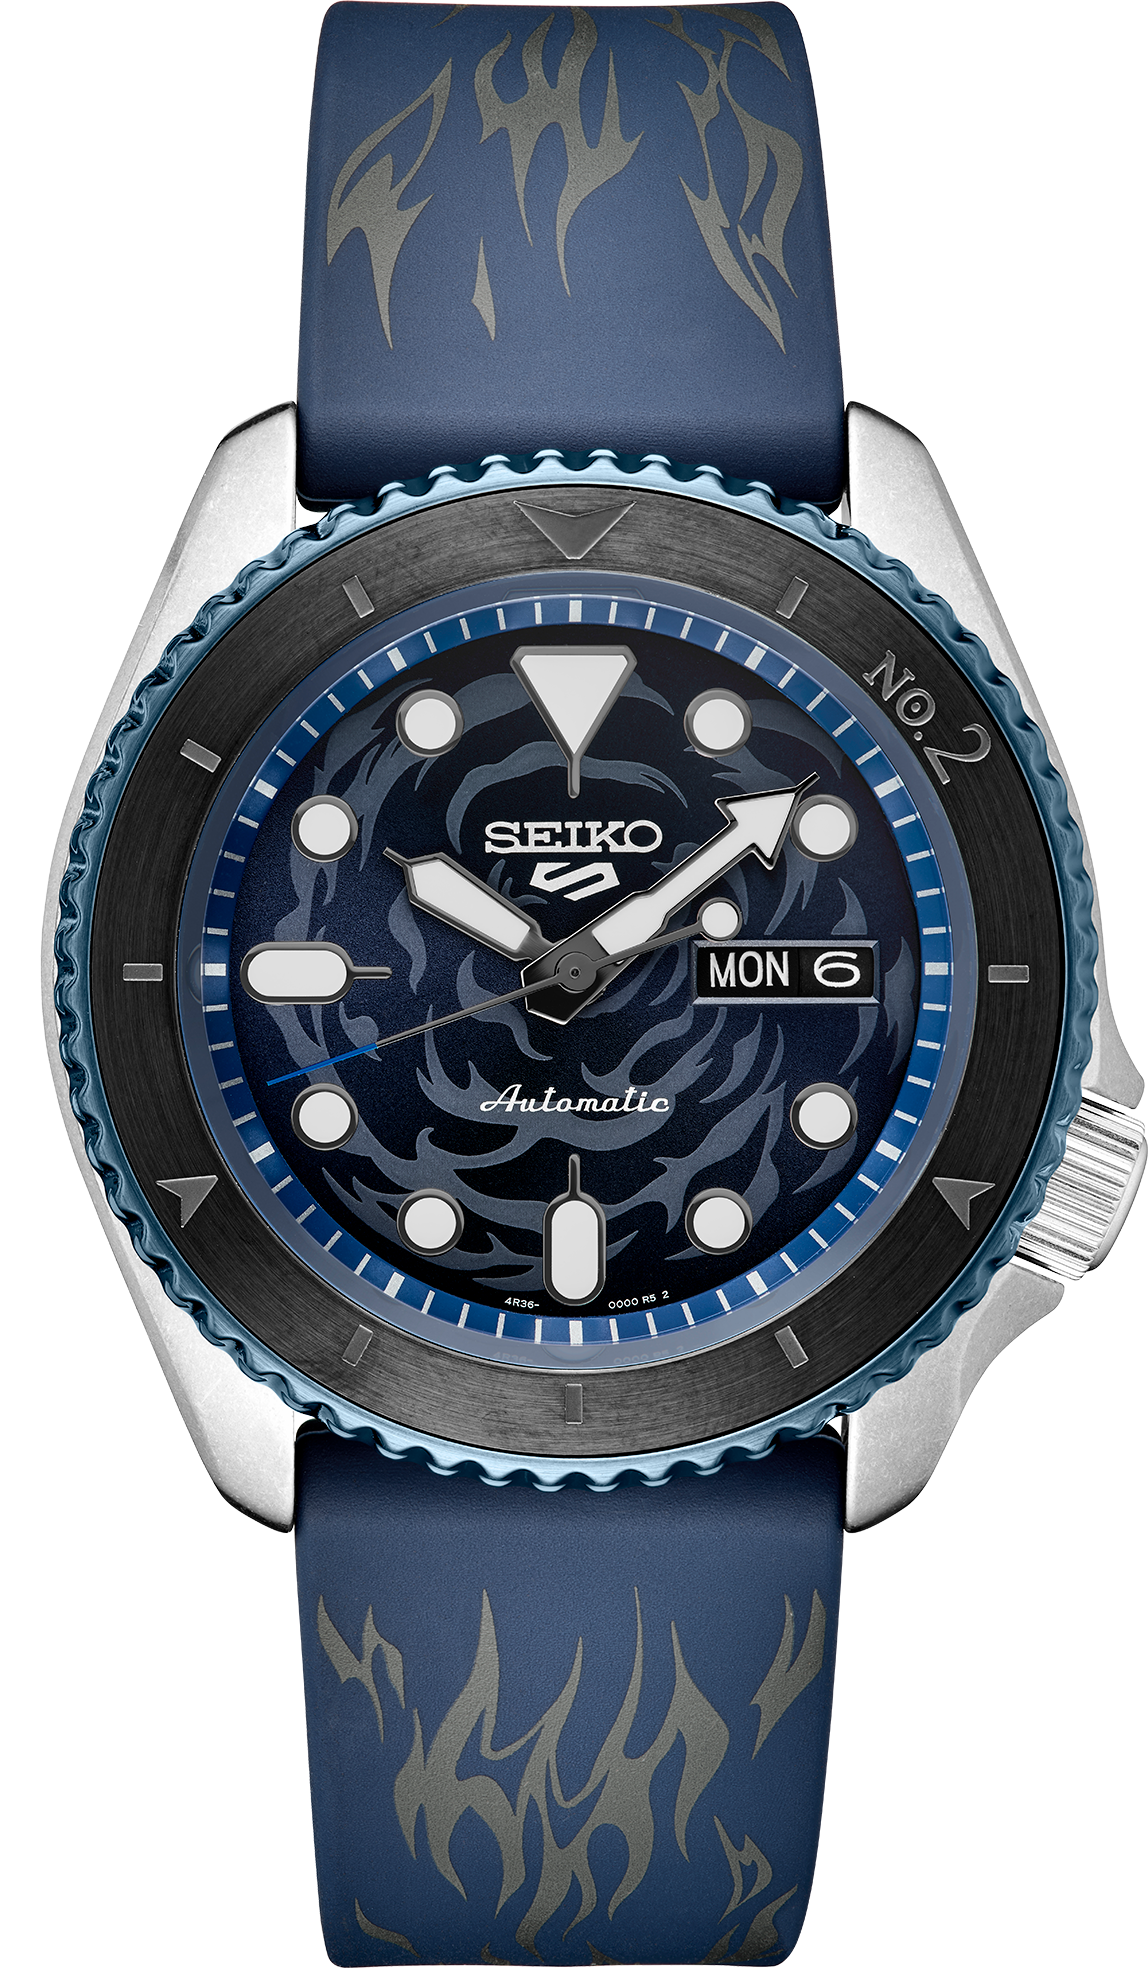 SRPH71 Seiko 5 Sports One Piece Sabo Limited Edition